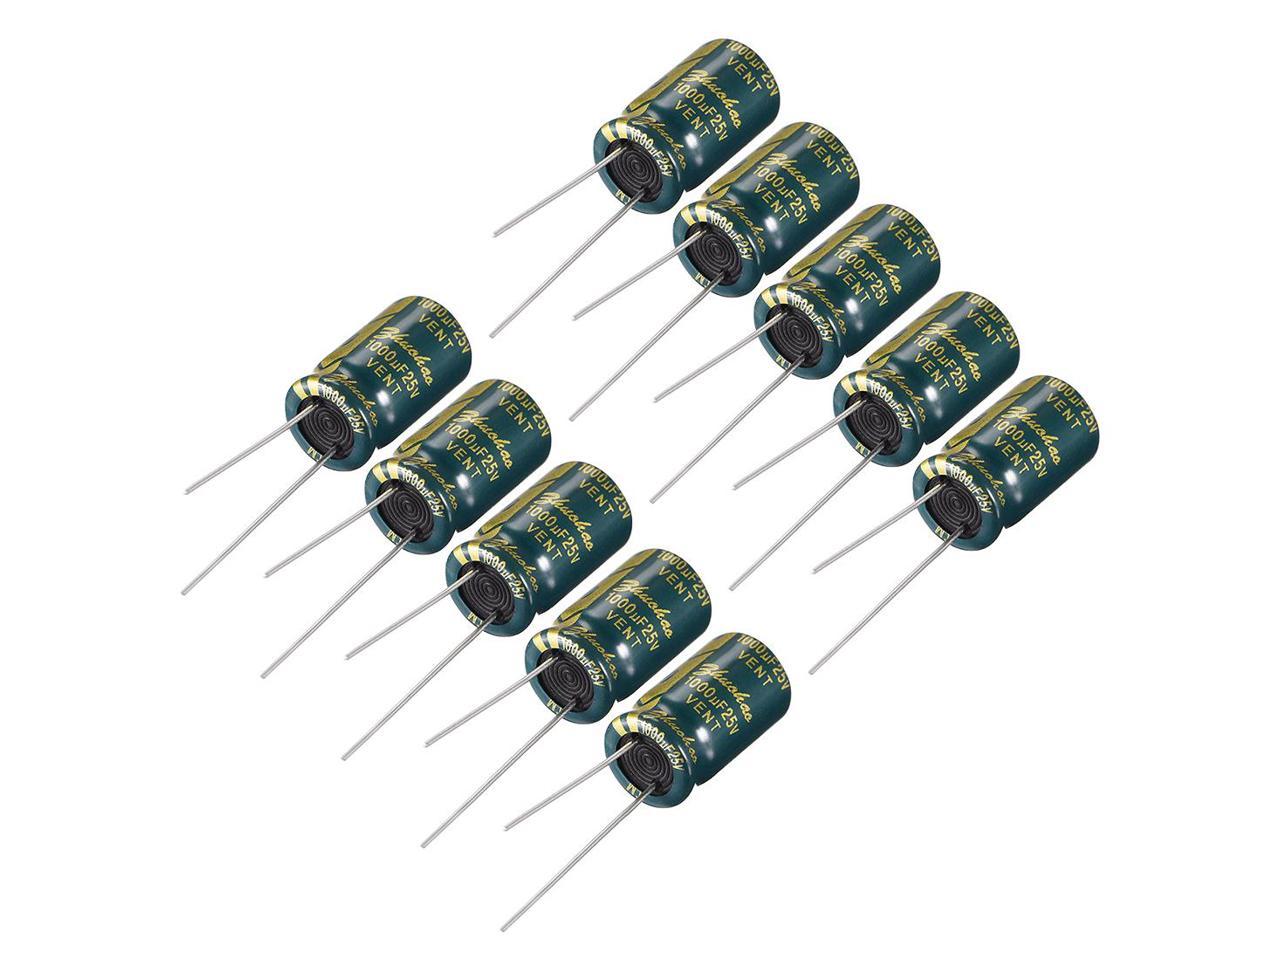 uxcell Aluminum Radial Electrolytic Capacitor Low ESR Green with 1000UF 10V 105 Celsius Life 3000H 8 x 12 mm High Ripple Current,Low Impedance 35pcs 